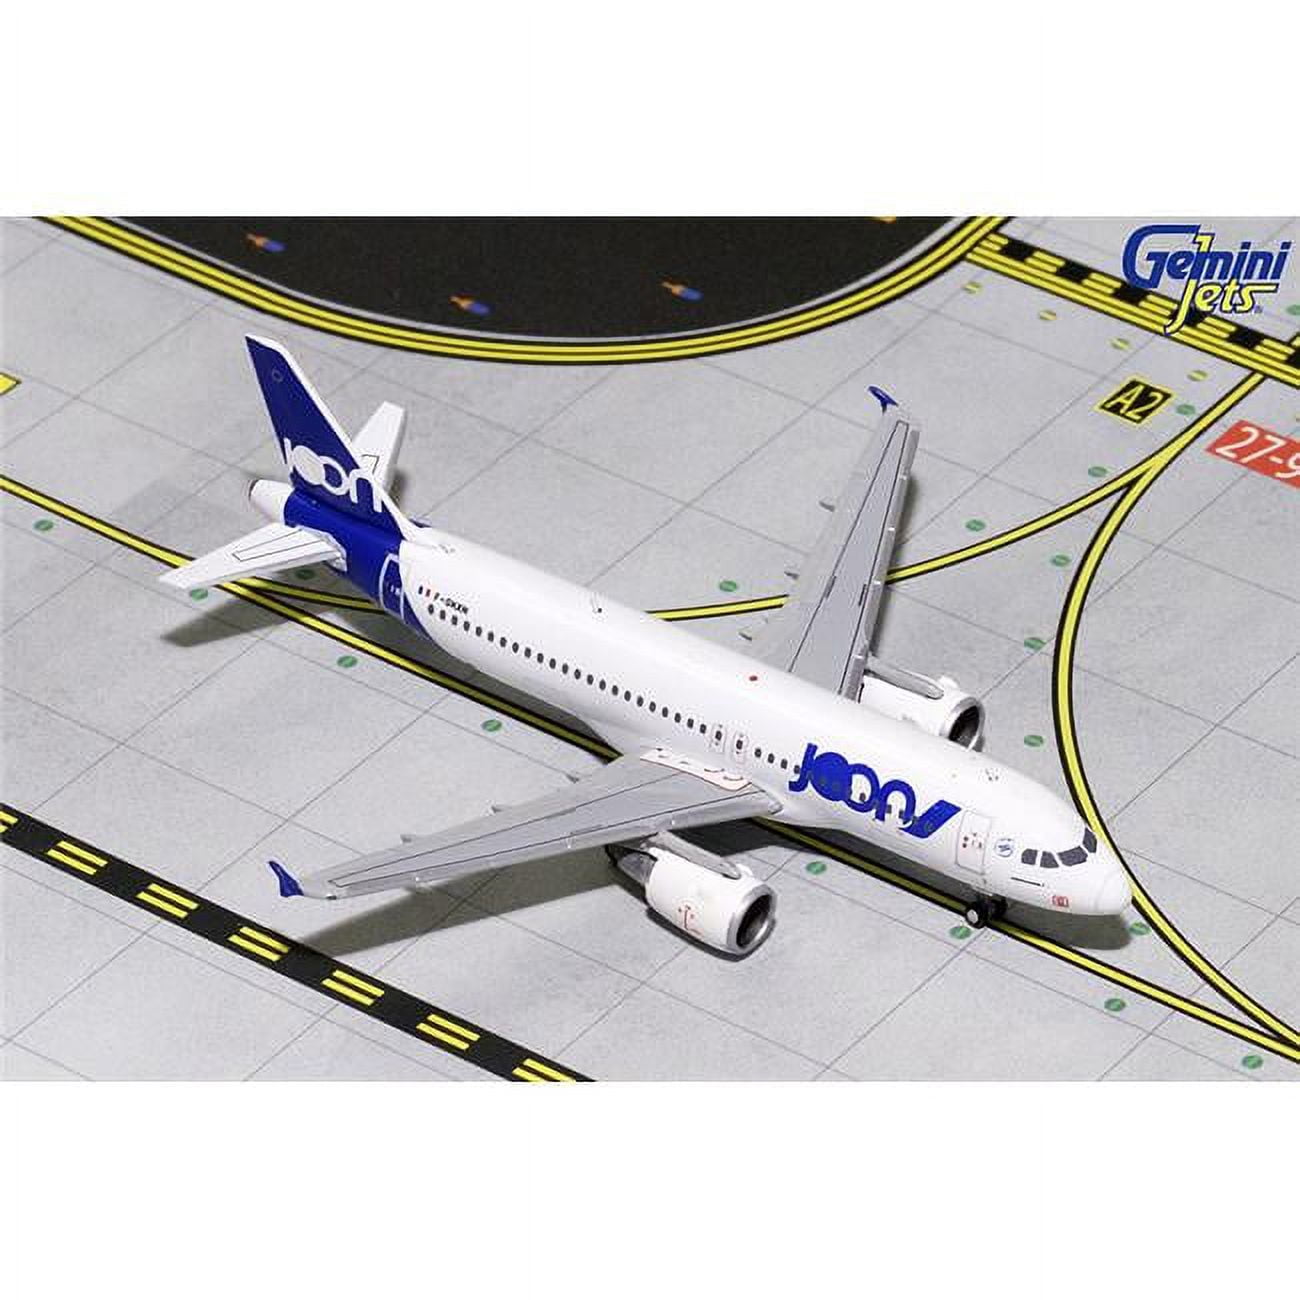 Gemini Jets Gj1764 No. F-gkxn A320 Diecast Model Joon Airlines With Scale 1 By 400